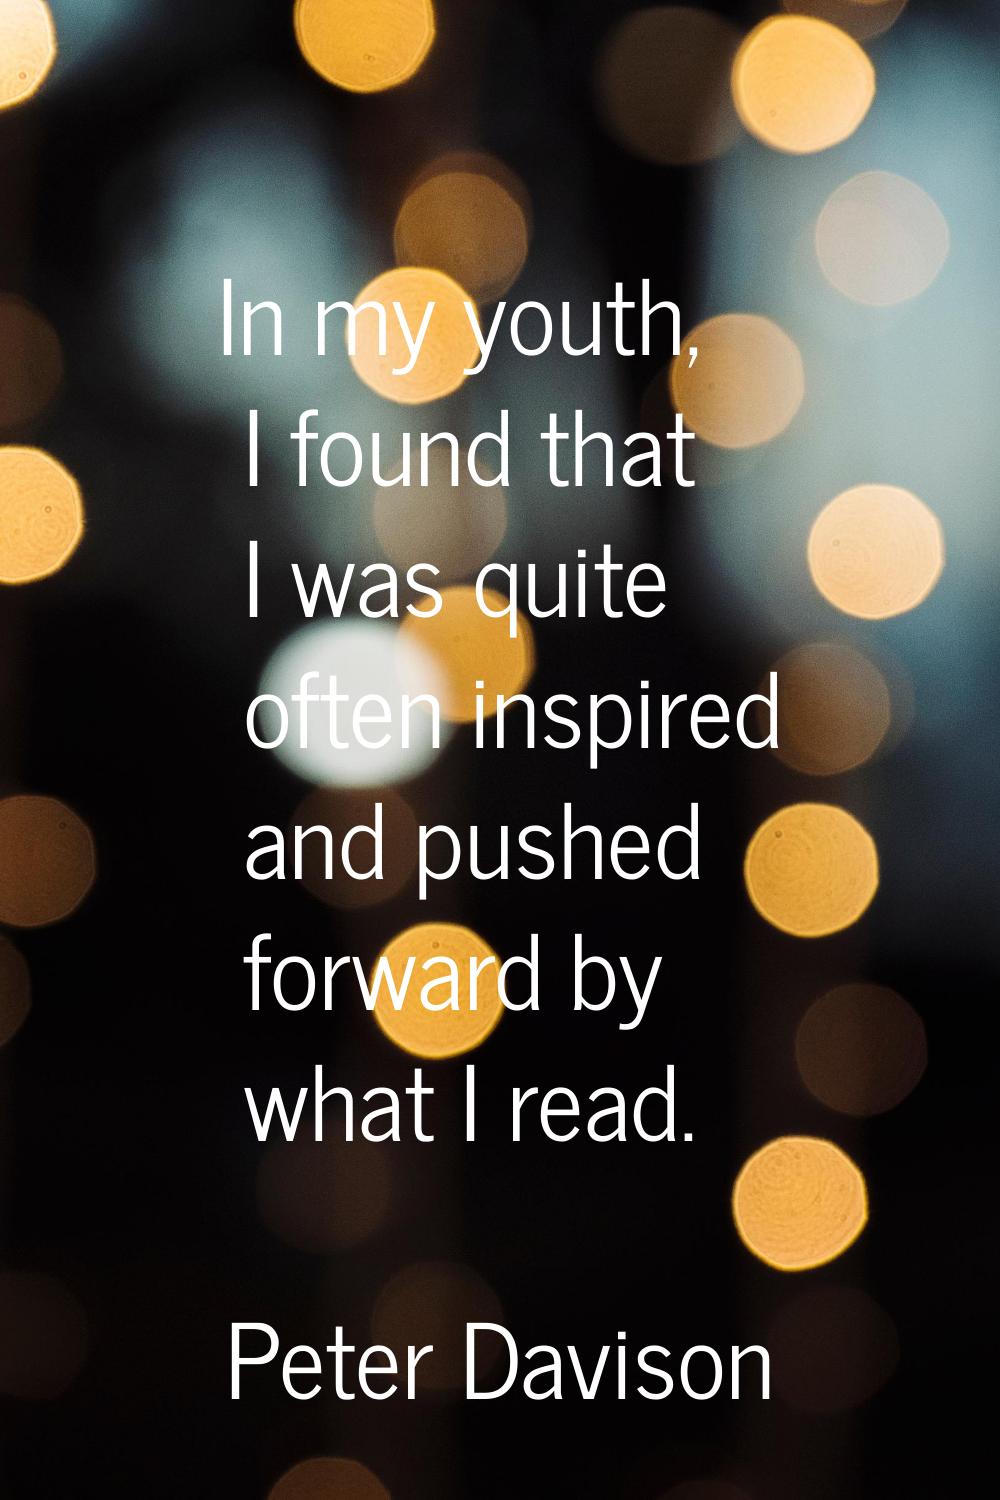 In my youth, I found that I was quite often inspired and pushed forward by what I read.